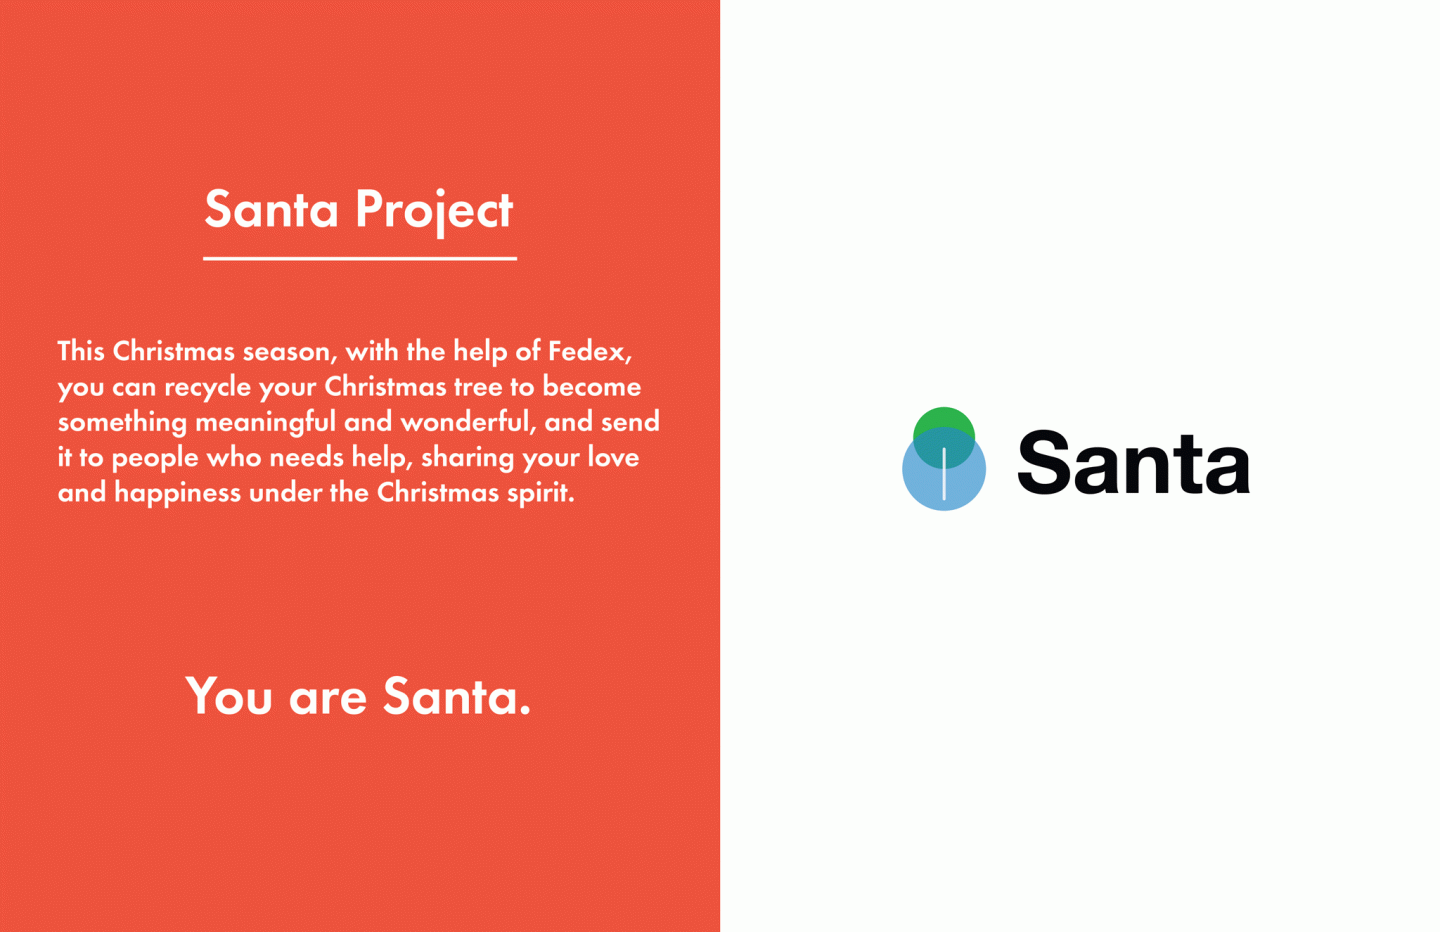 Santa Project for Fedex